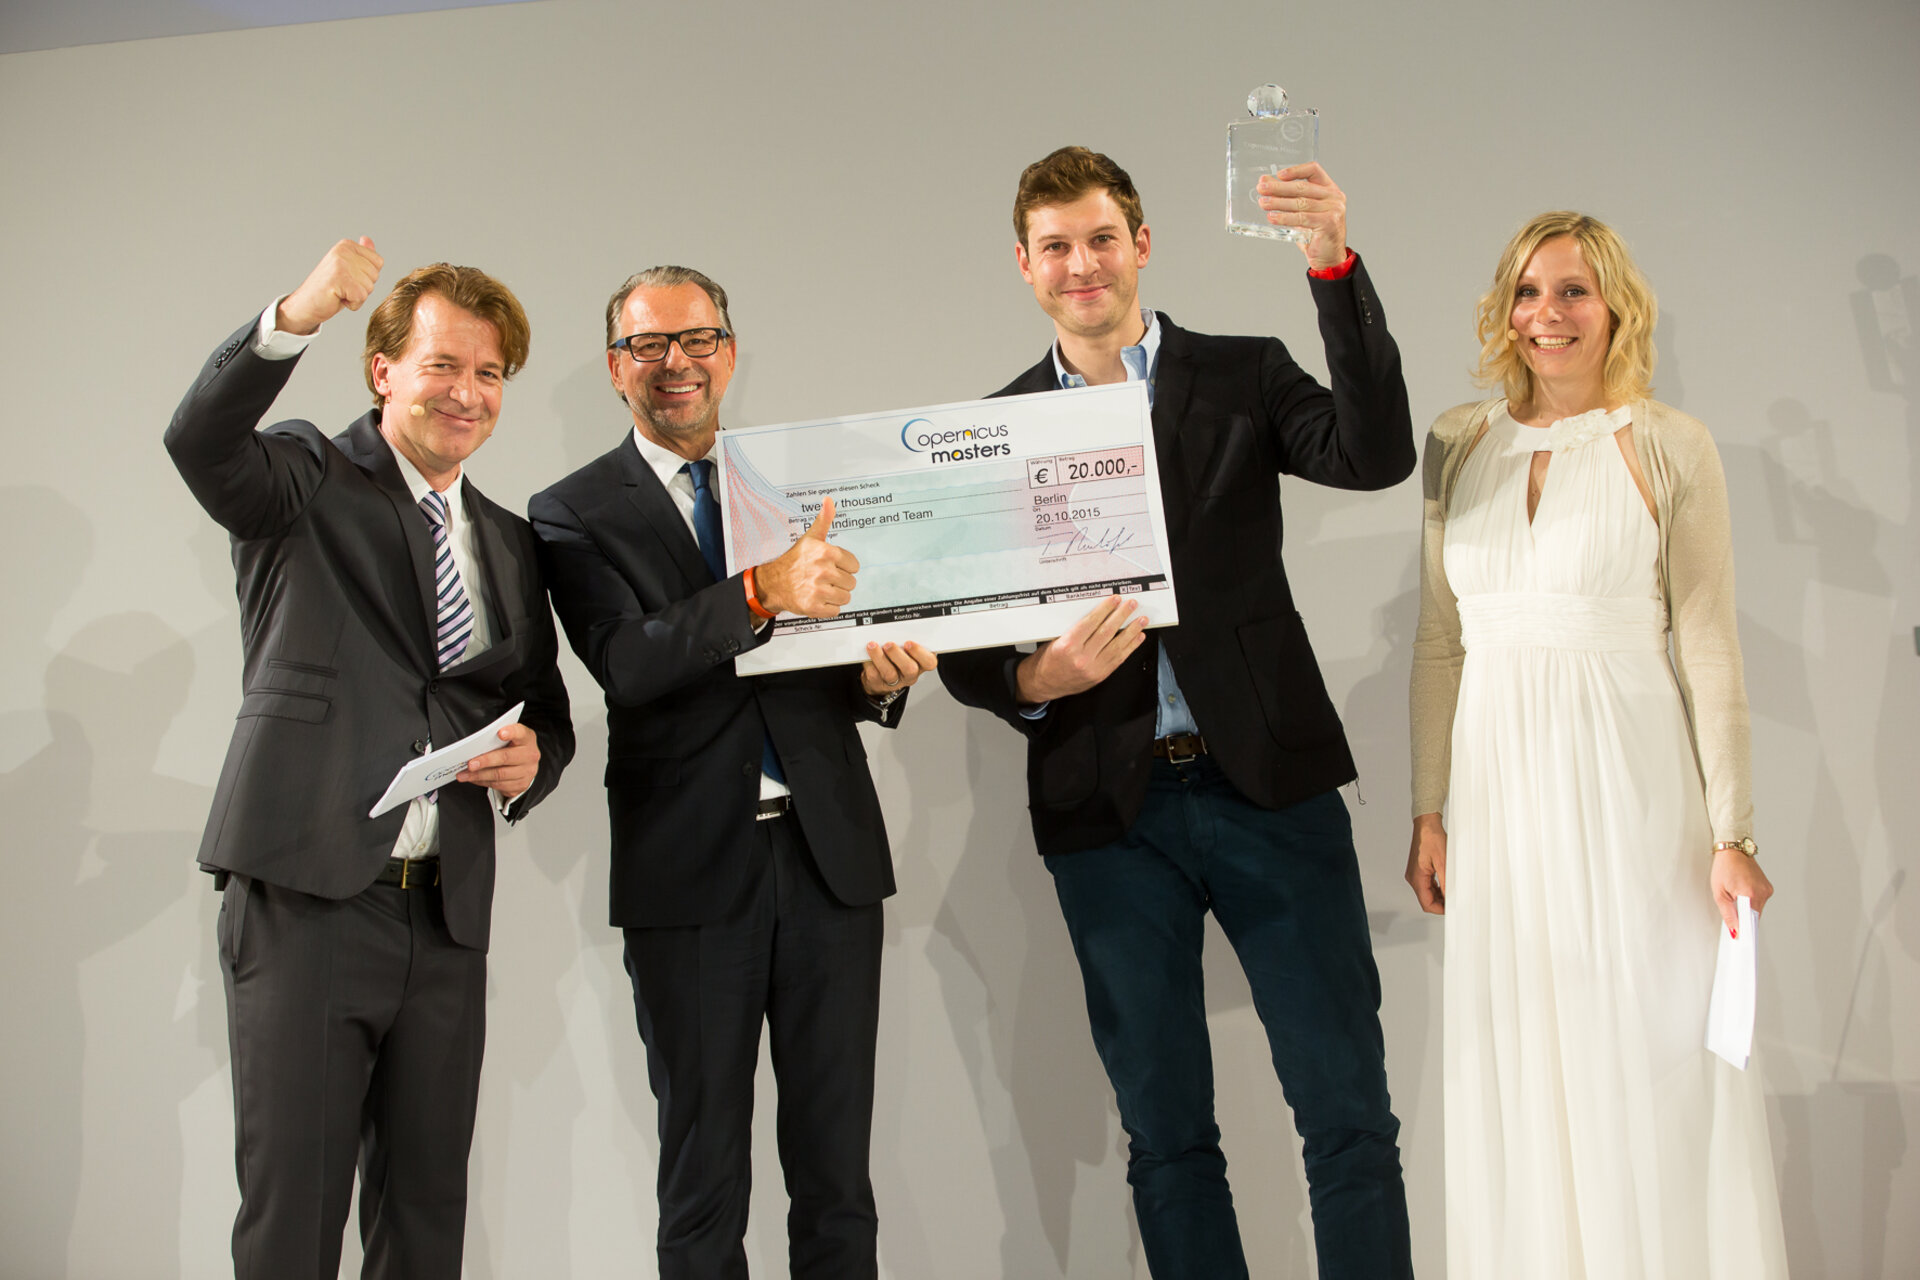 2015 Copernicus Masters first prize